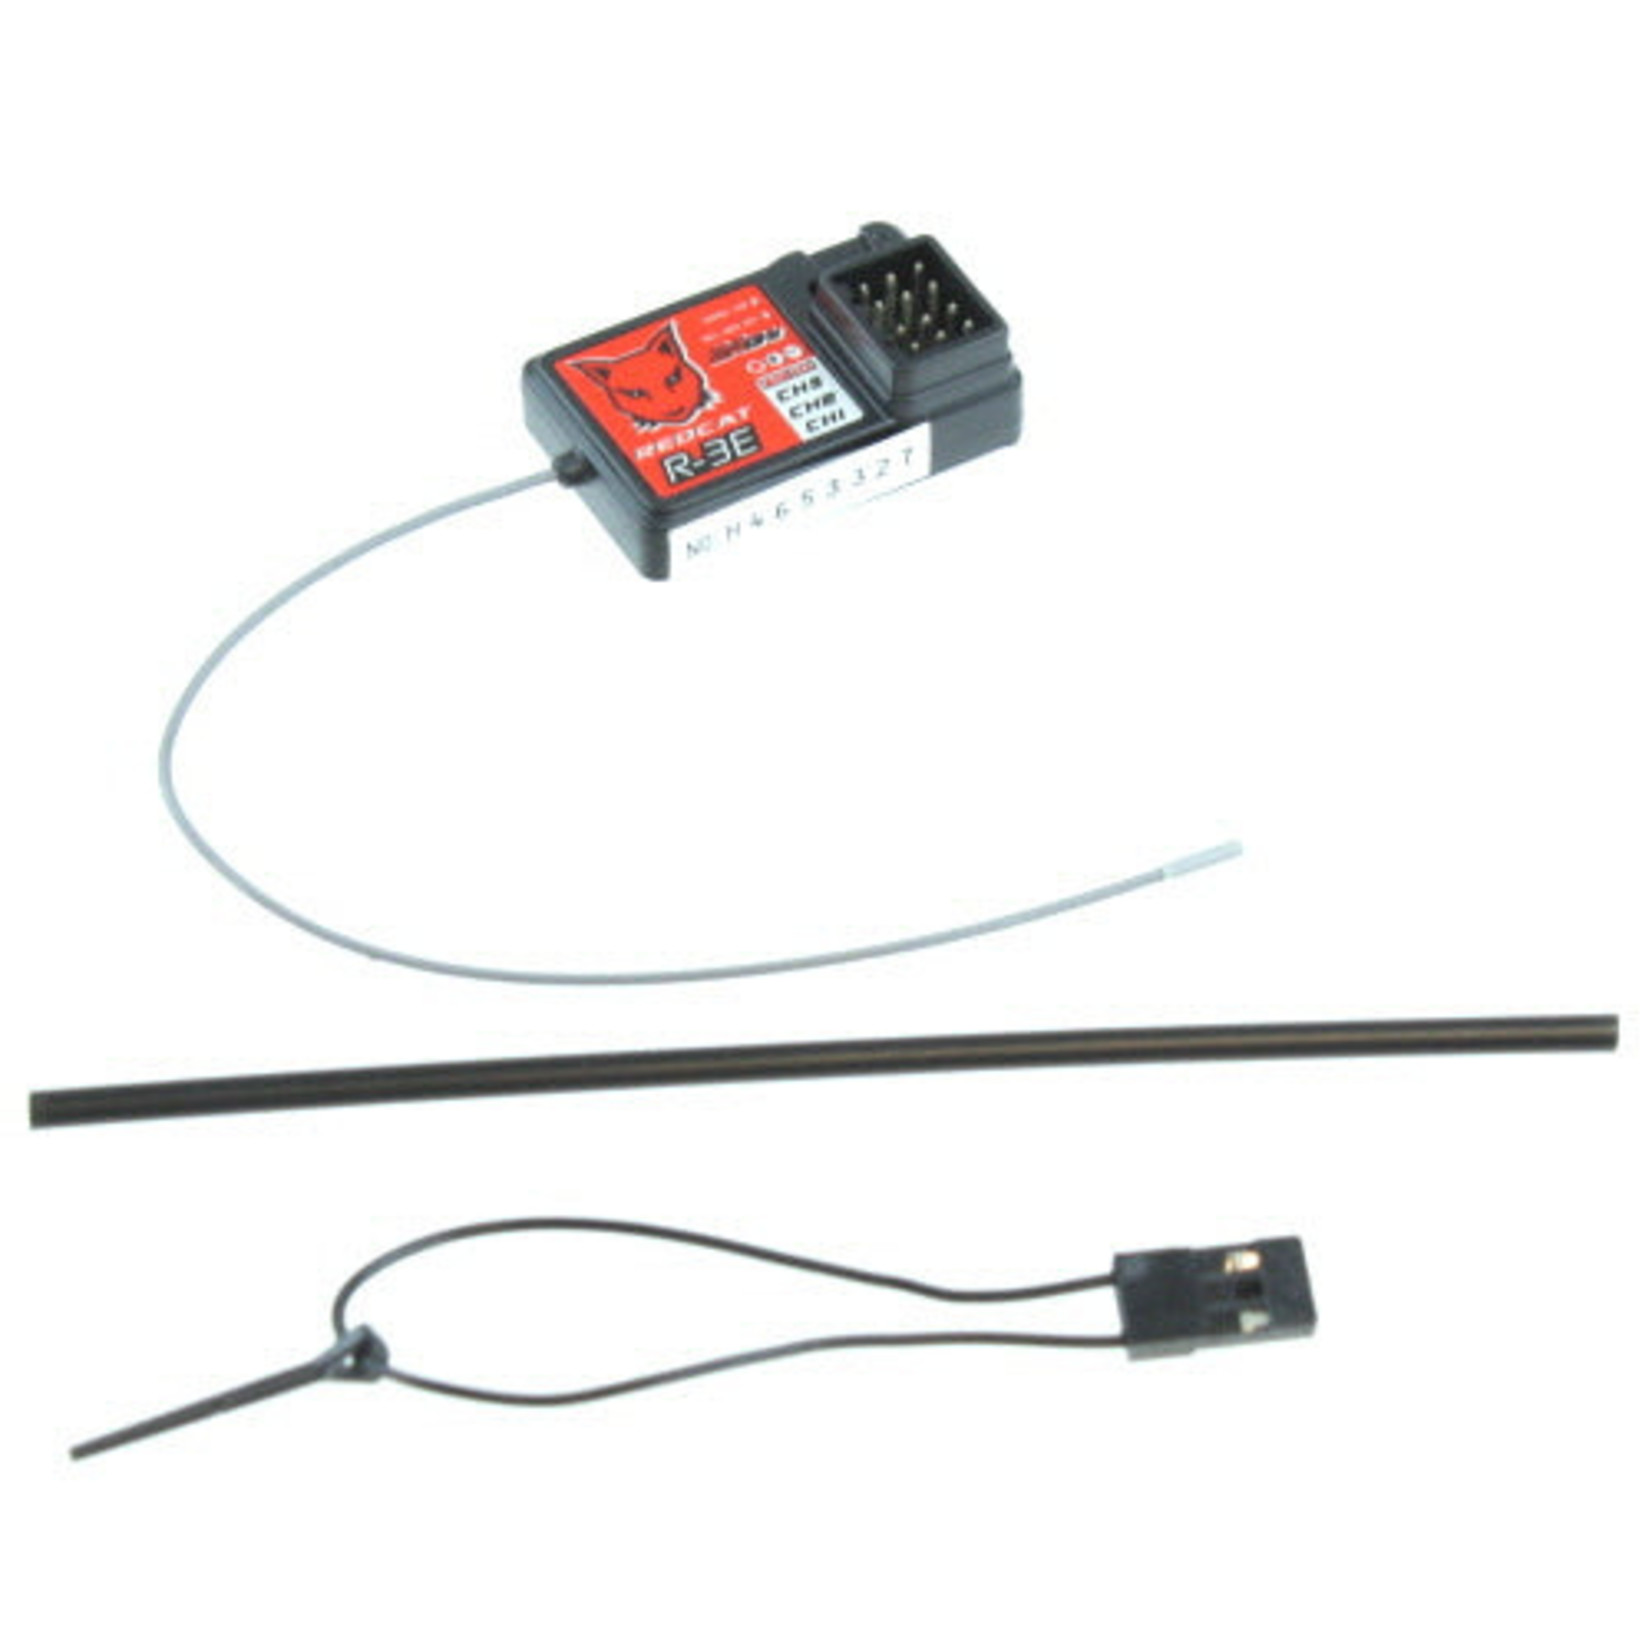 Redcat Racing 28480  Receiver (Flysky FS-A3) (Compatible with RCR-2CENR radio)